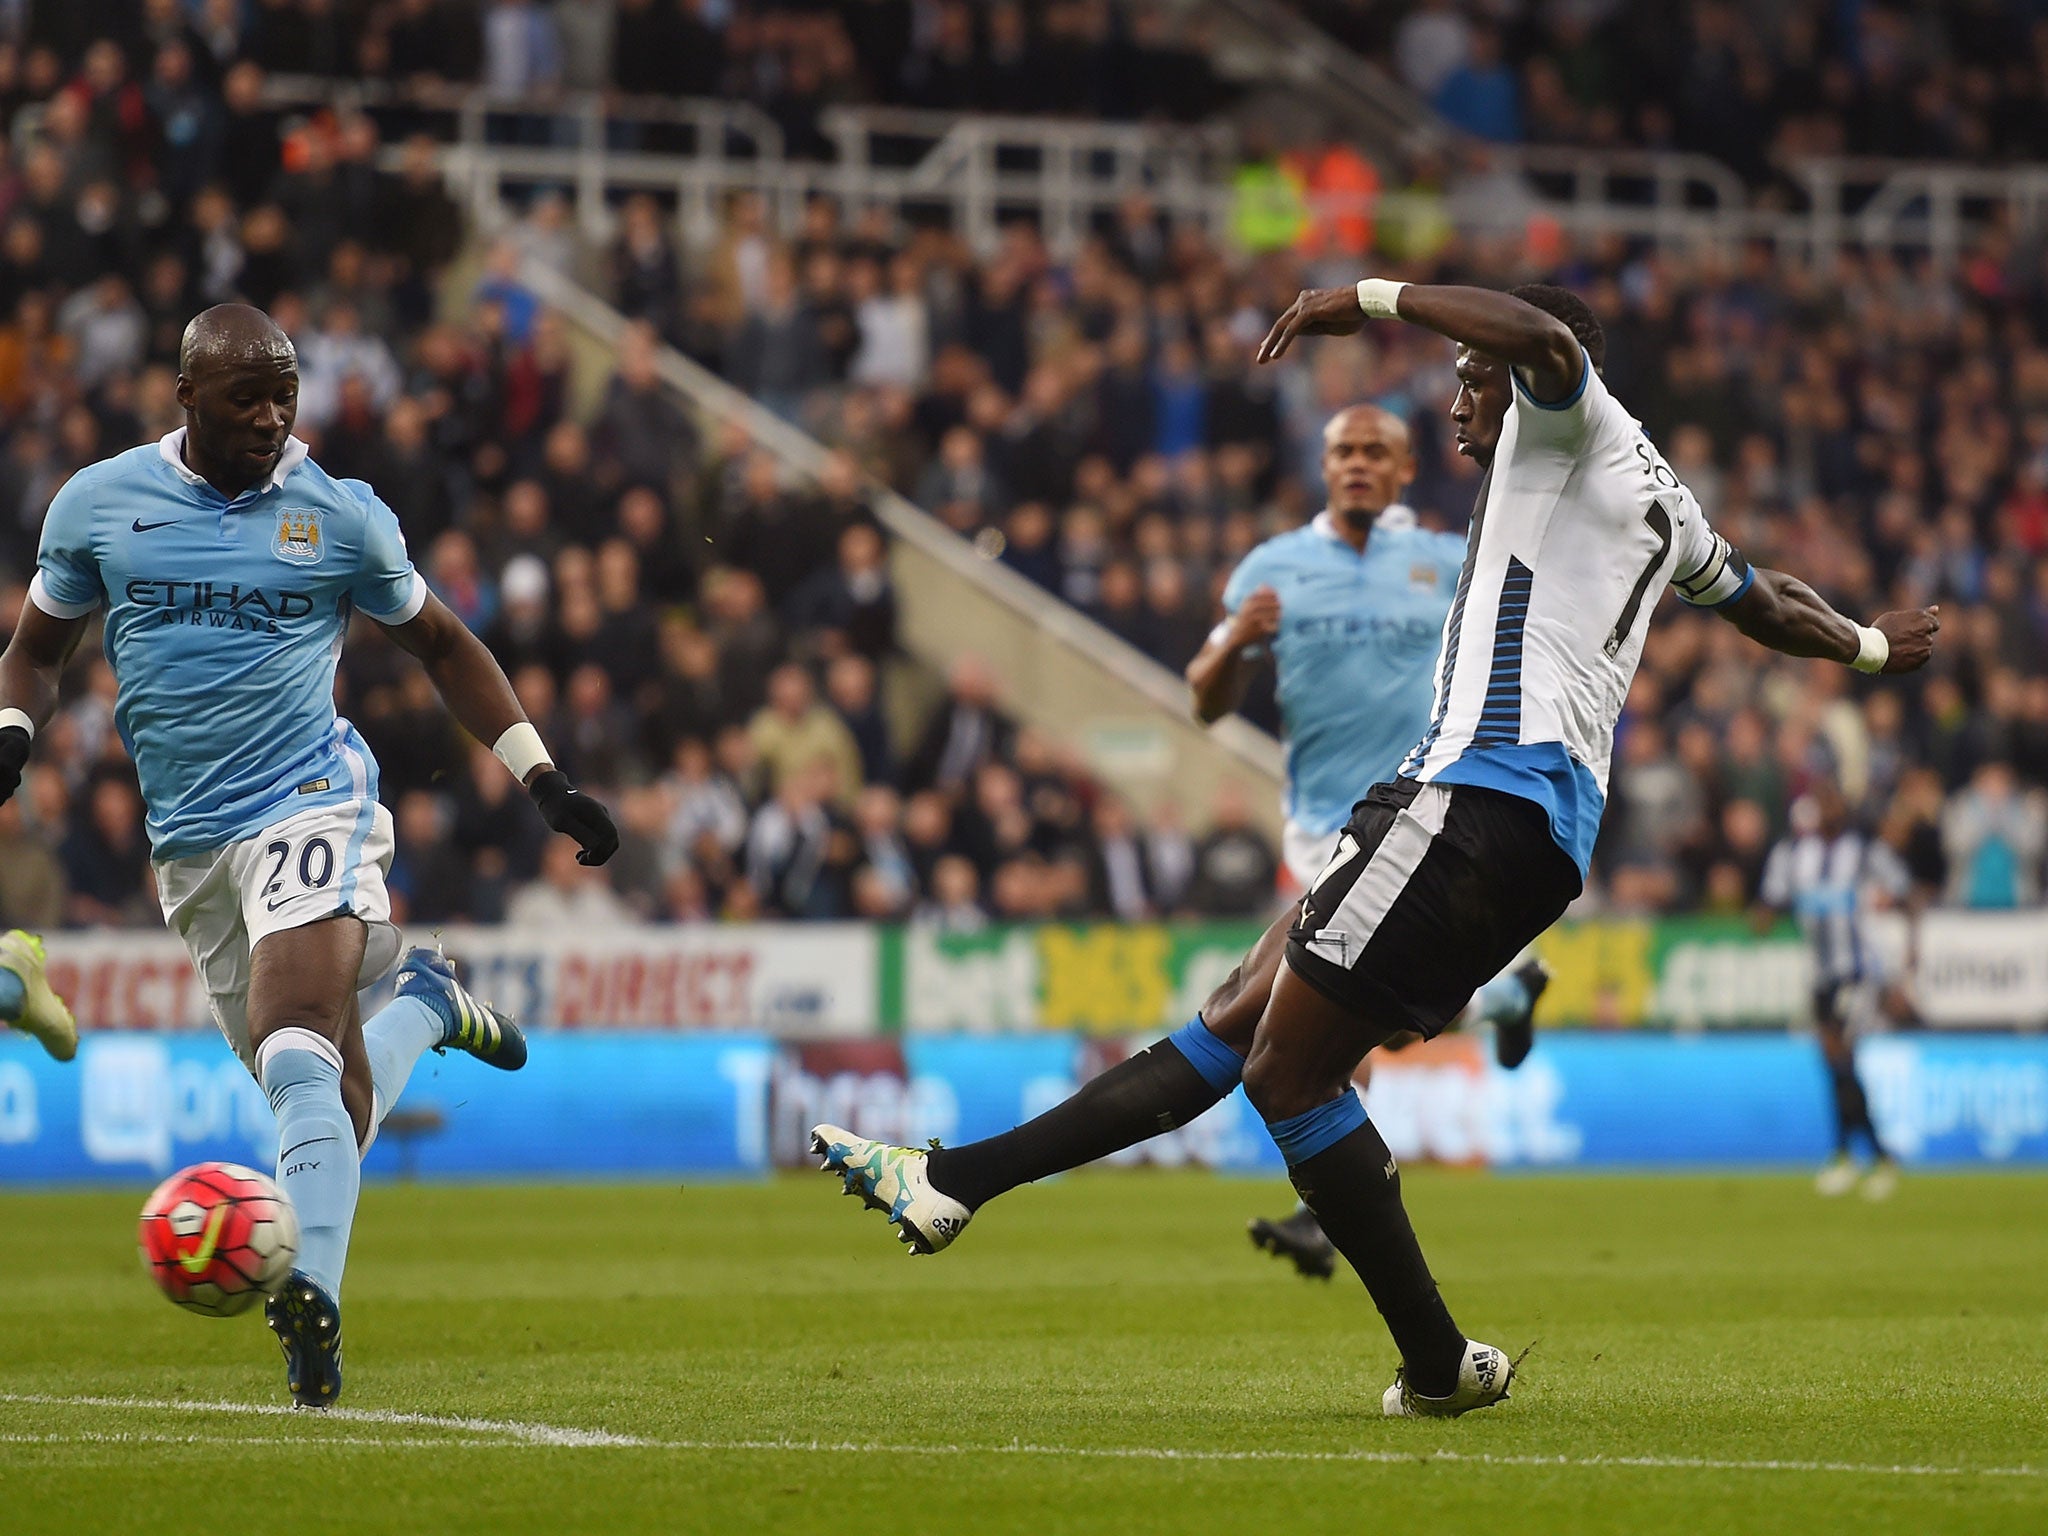 Newcastle captain Moussa Sissoko (right) was outstanding against Manchester City